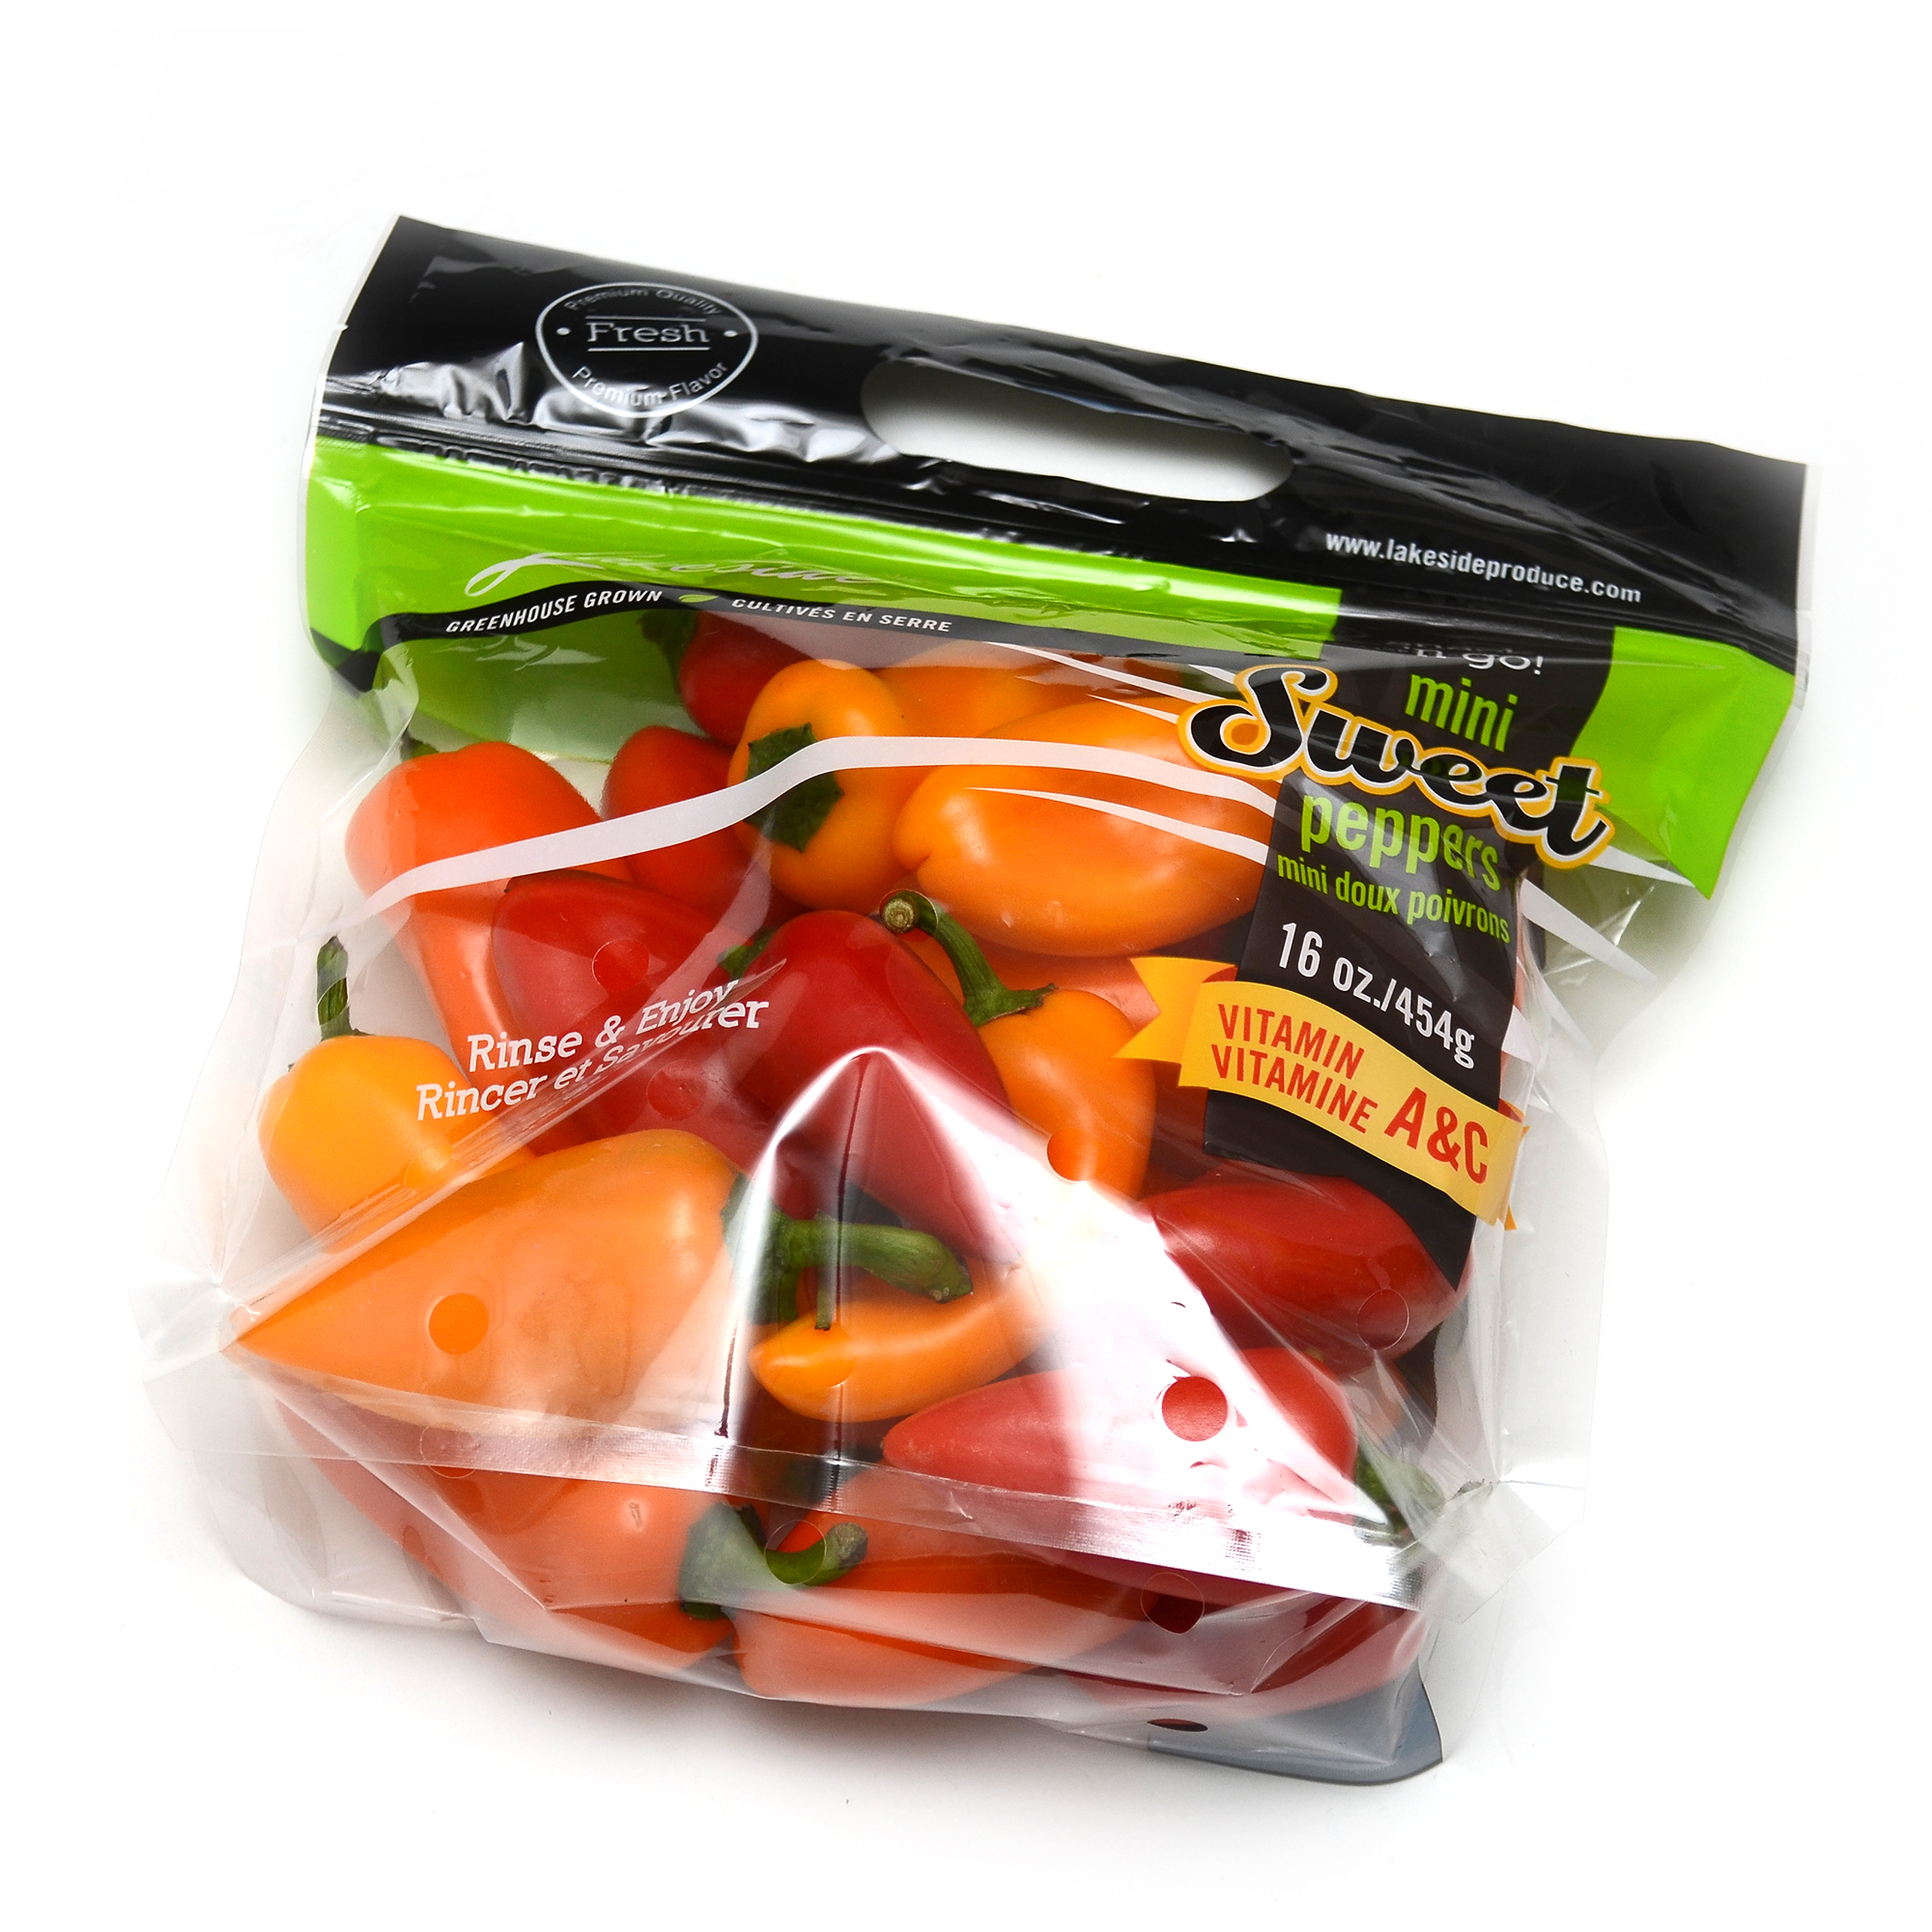 Mini Peppers, 1 lb bag (approximately 8 peppers) - Walmart.com